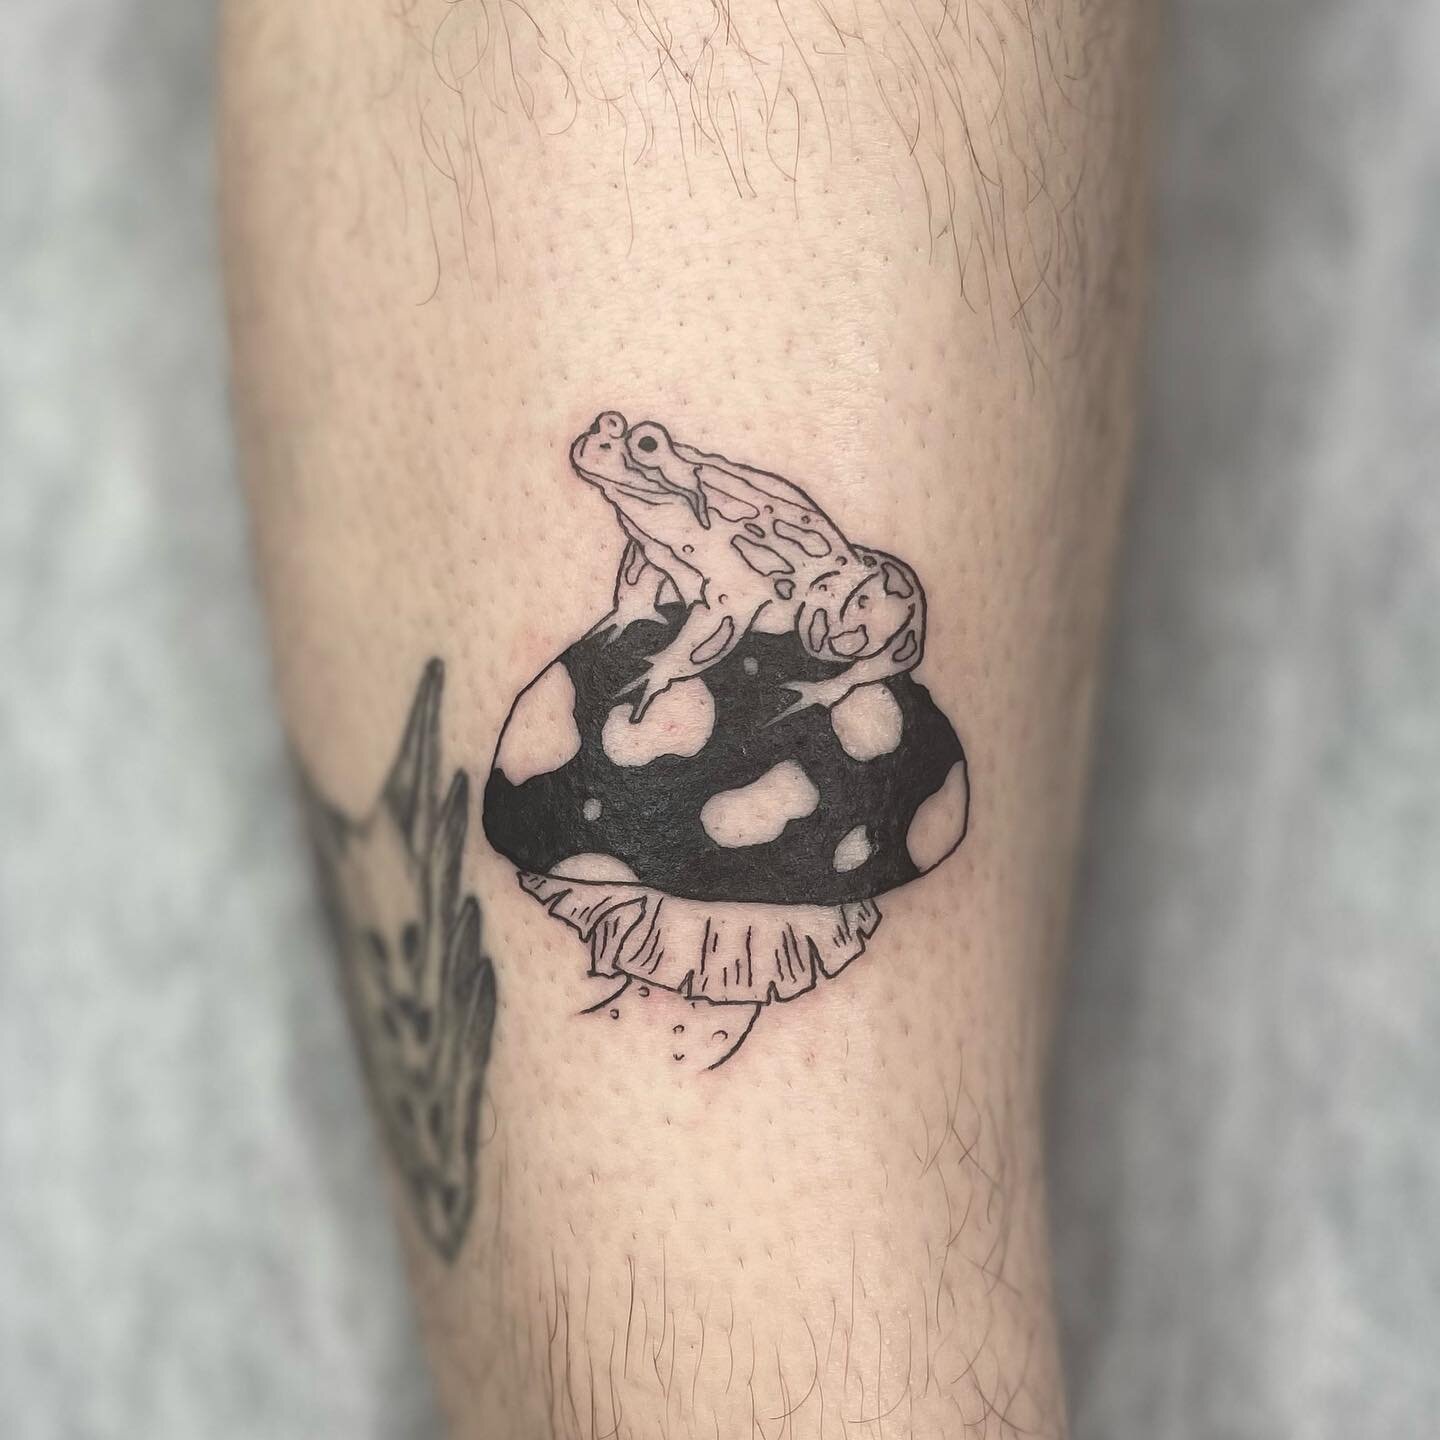 Happy Halloween! Here&rsquo;s a cute little frog from my flash, thank you to everyone who came in for the Halloween Event! 🎃💕
.
.
#halloween #halloweentattoo #spooky #spookyseason #spookytattoo #frog #frogtattoo #mushroom #mushroomtattoo #toad #toa